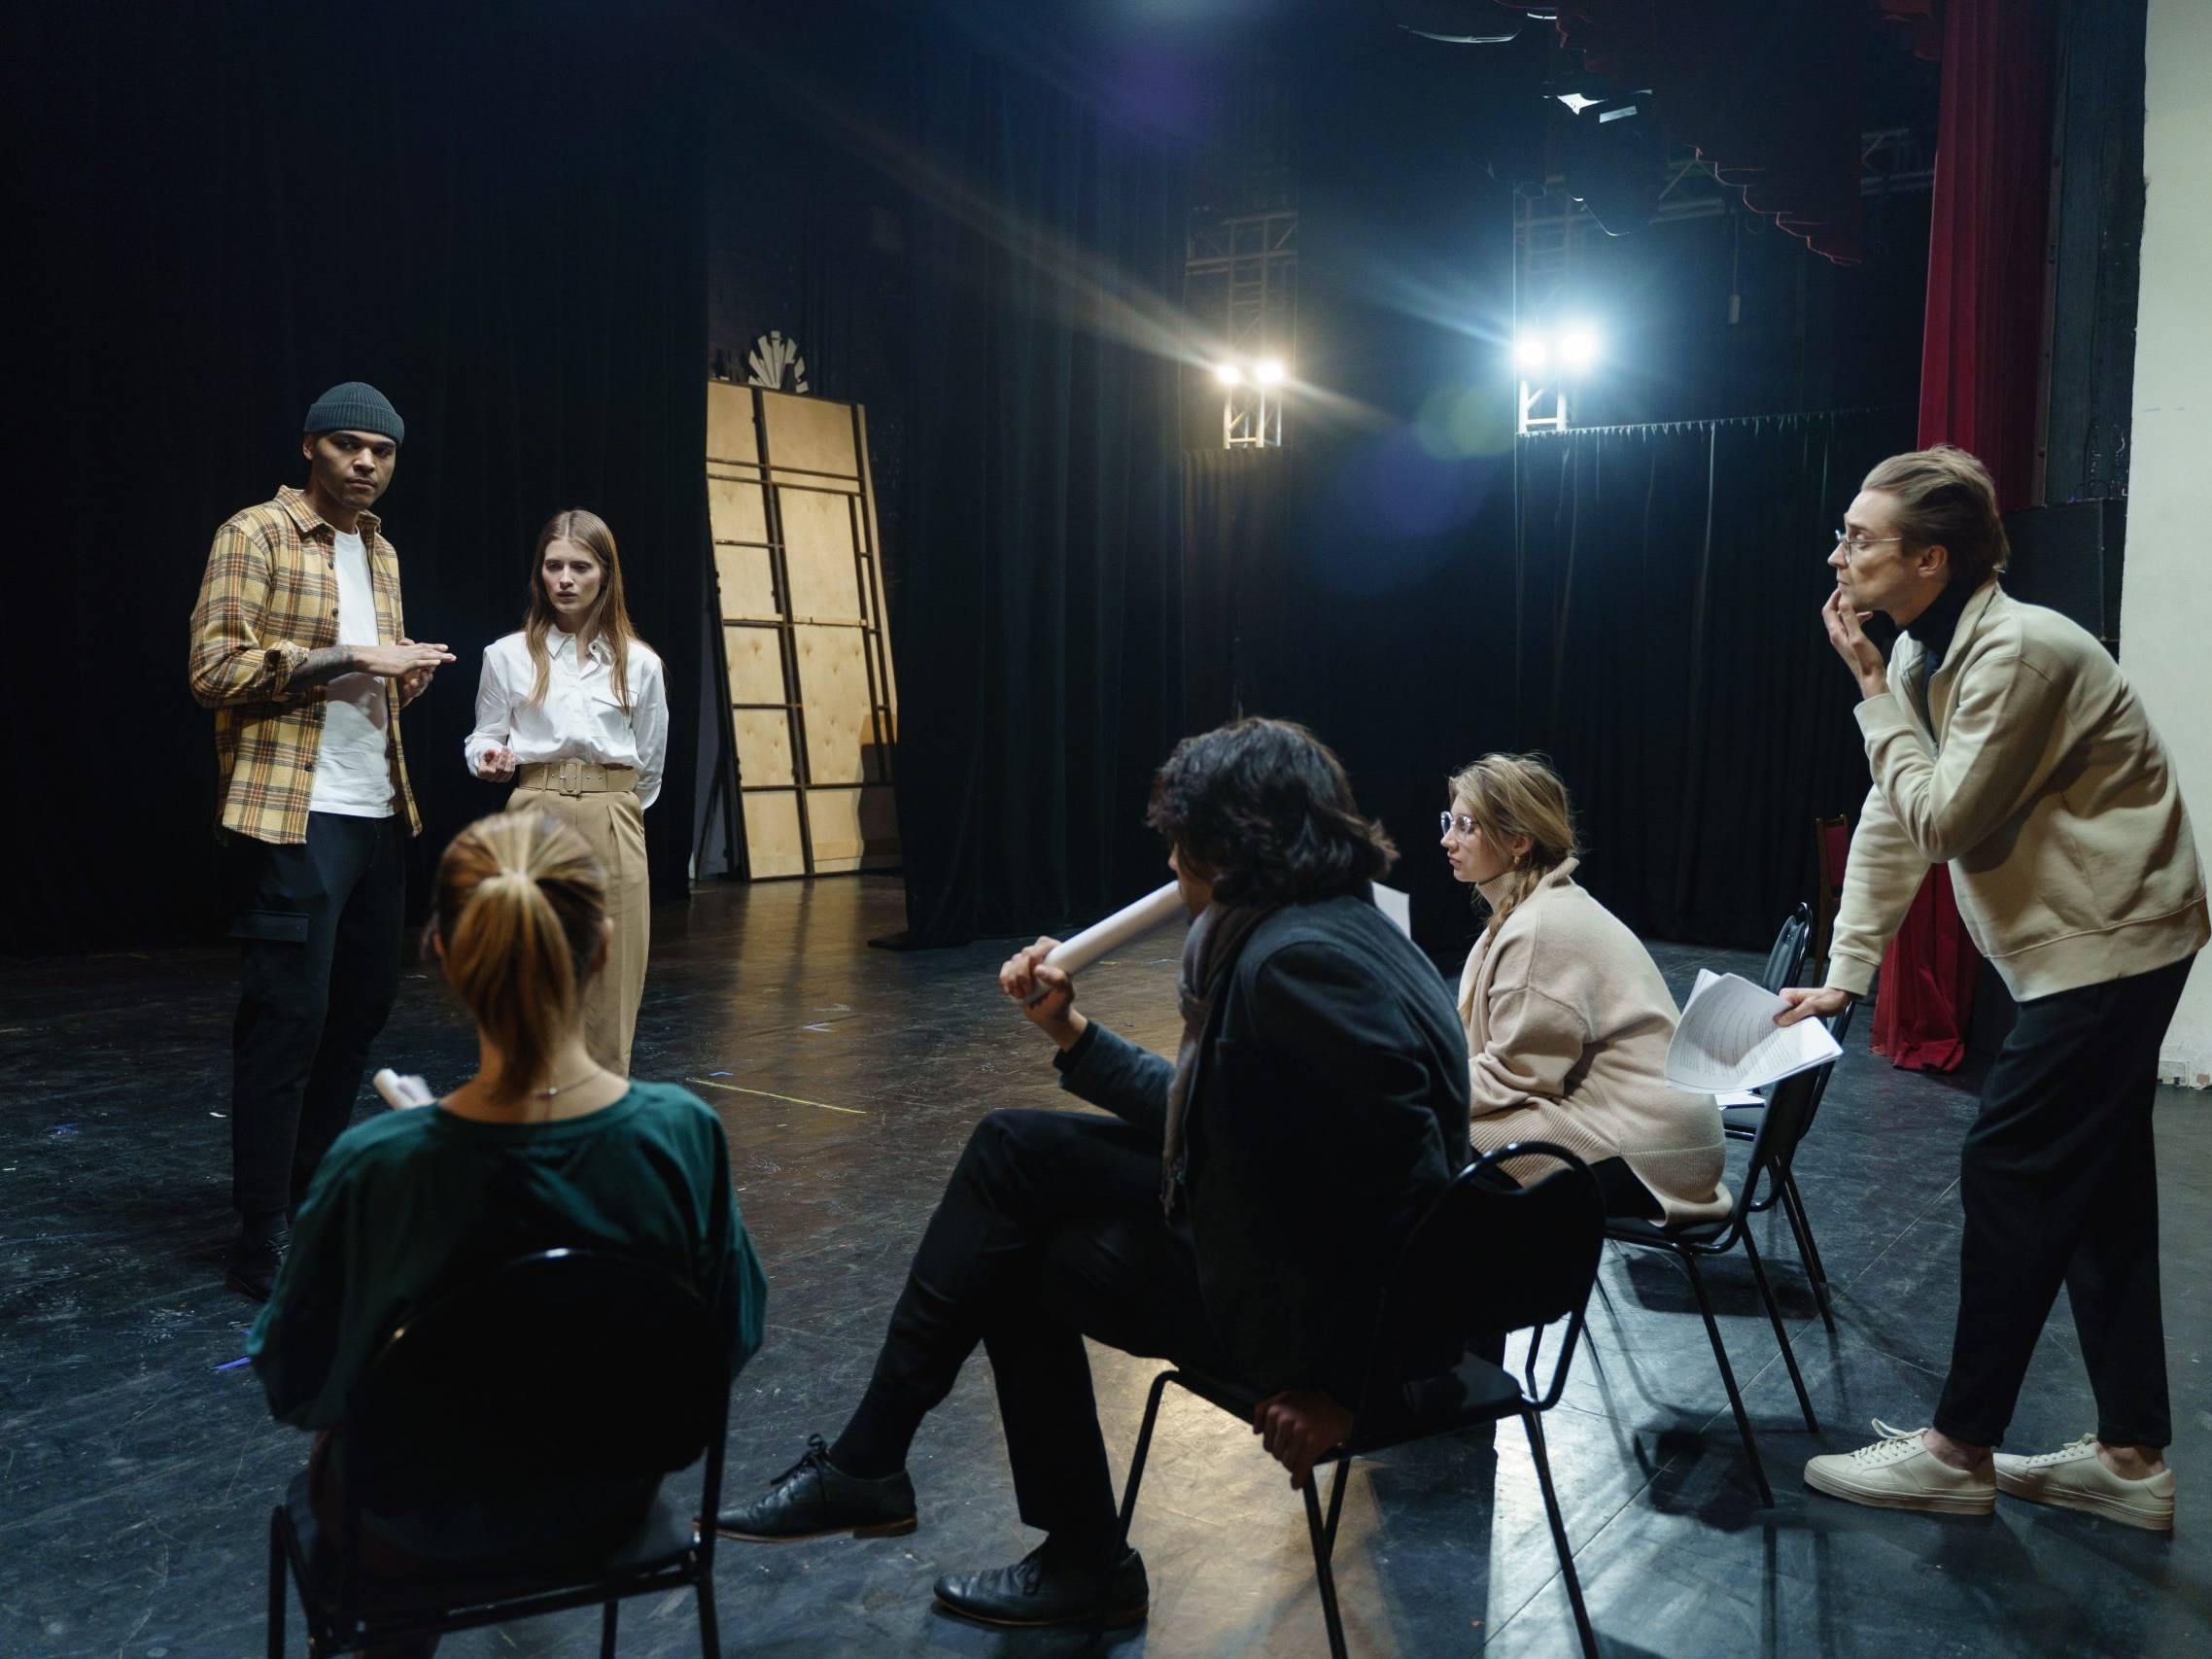 voice coaching work lessons for studio stage drama acting skills training